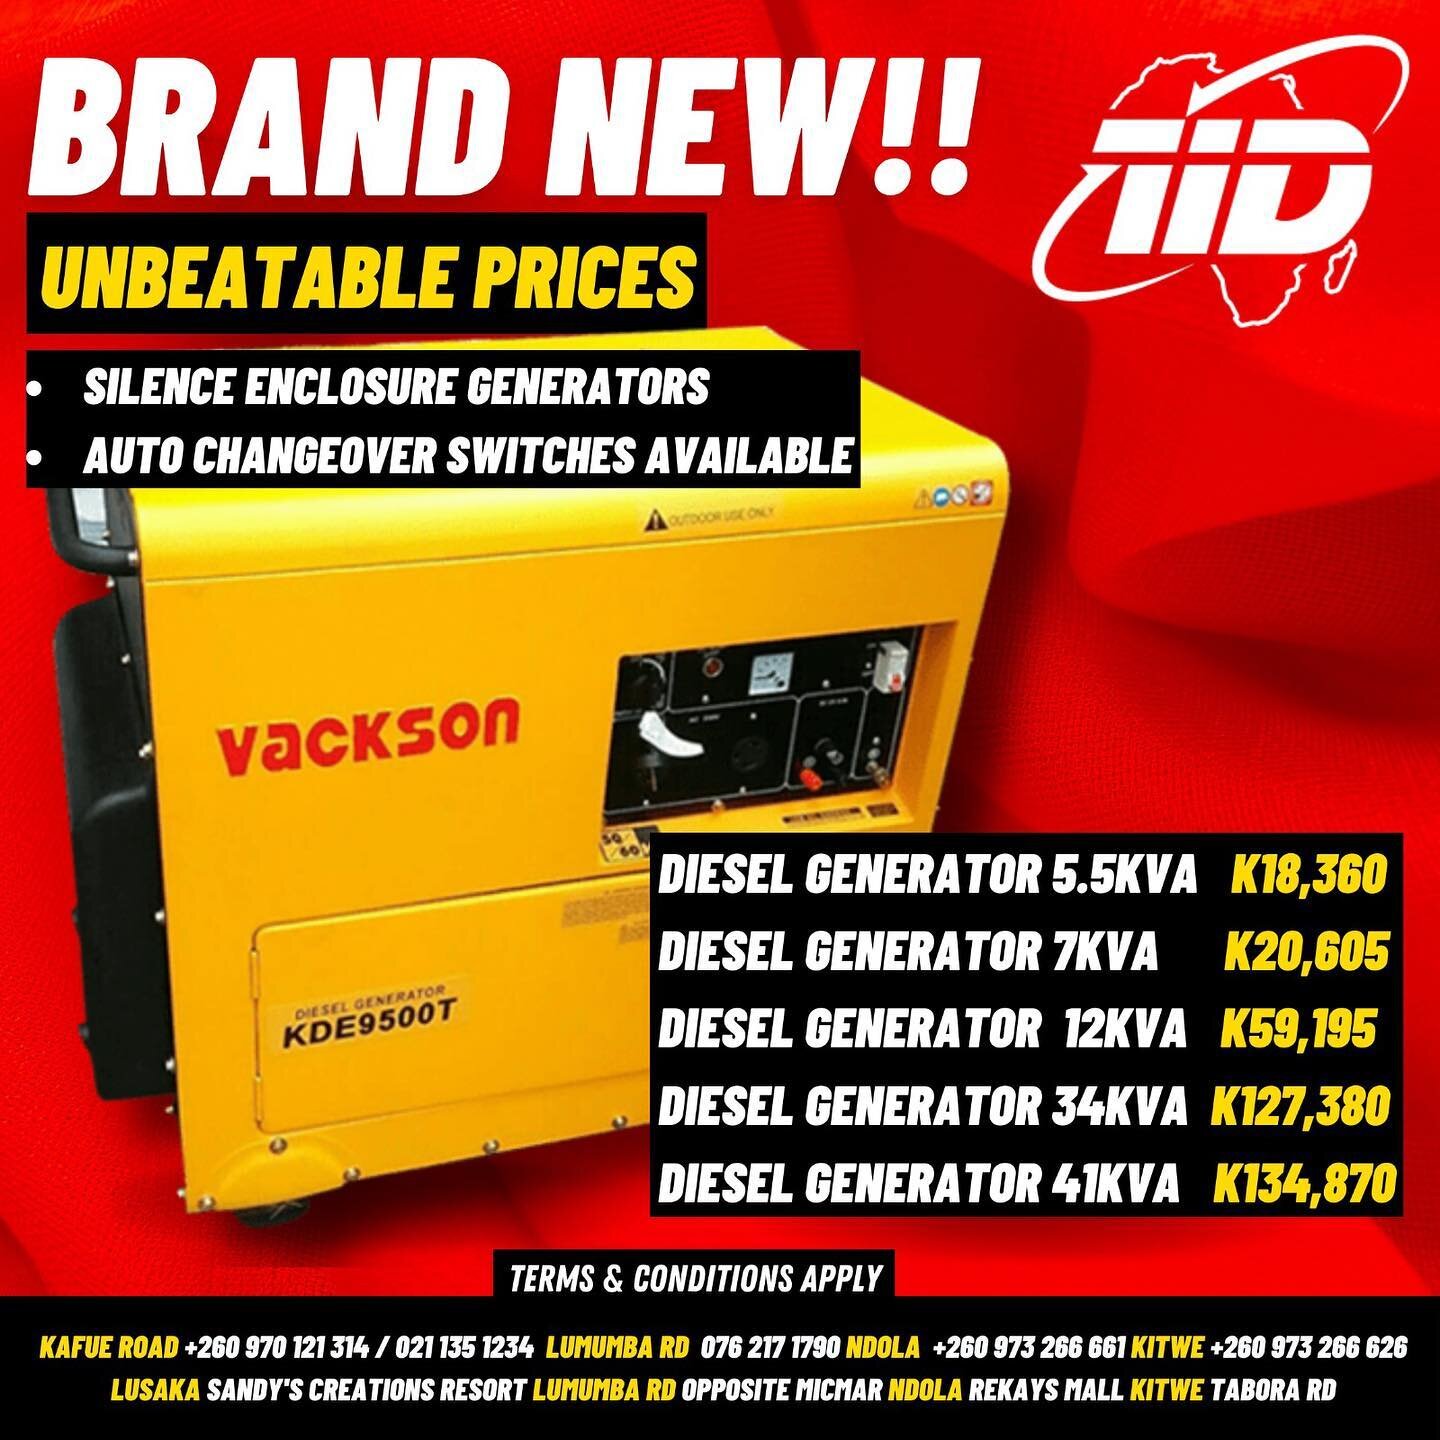 Brand new to TRADEBRANDS ZAMBIA! Generators at unbeatable prices! Call us now to purchase / enquire 

Kafue Road/Sandy&rsquo;s Creations Resort +260970121314 / +260211351234
Lumumba Road 0762171790
Ndola +260973266661
Kitwe +26097326662